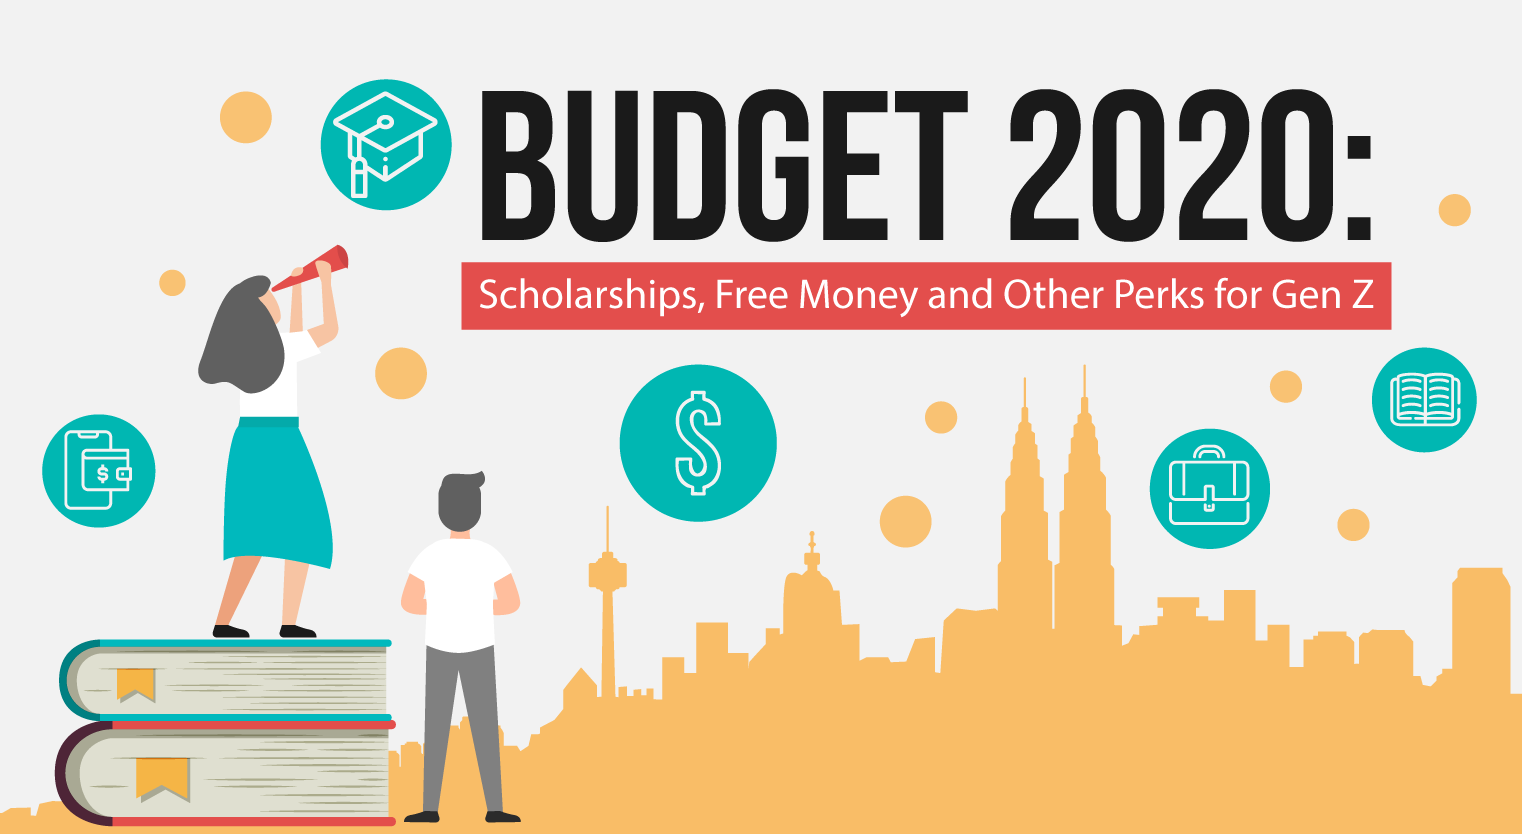 Budget 2020: Scholarships, Free Money & More Gen Z Perks - Feature-Image